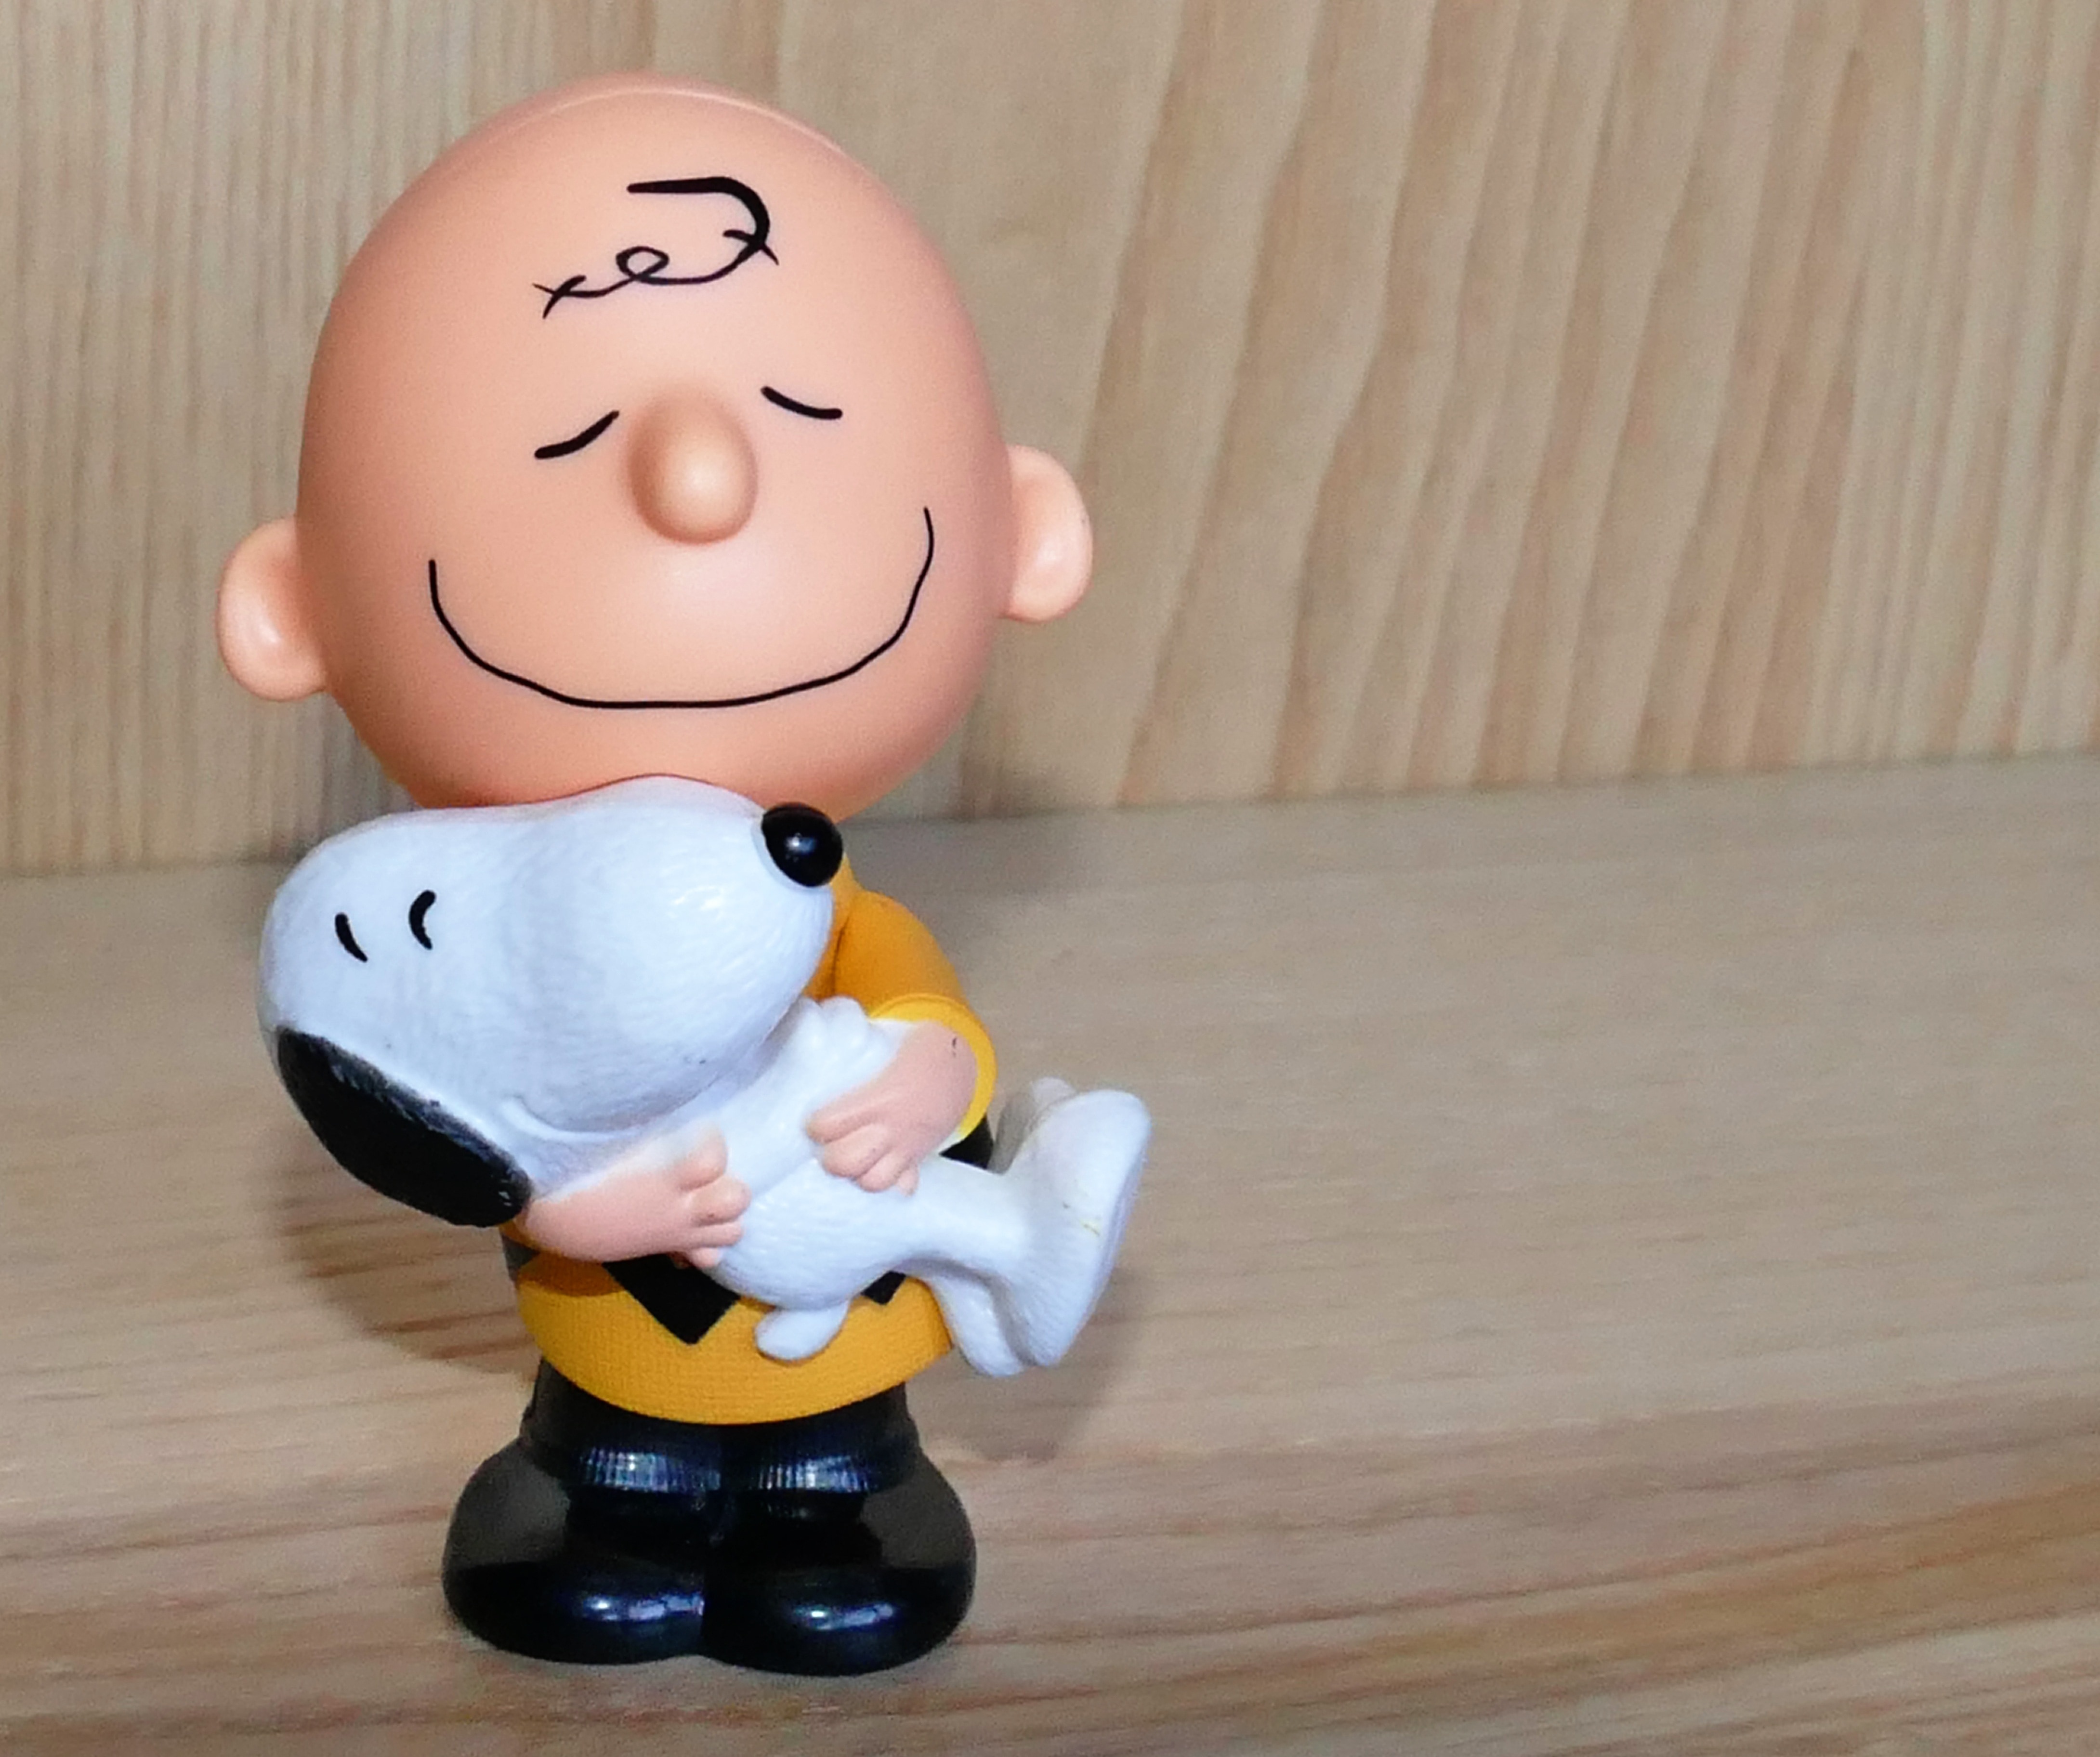 charlie brown and snoopy figurine